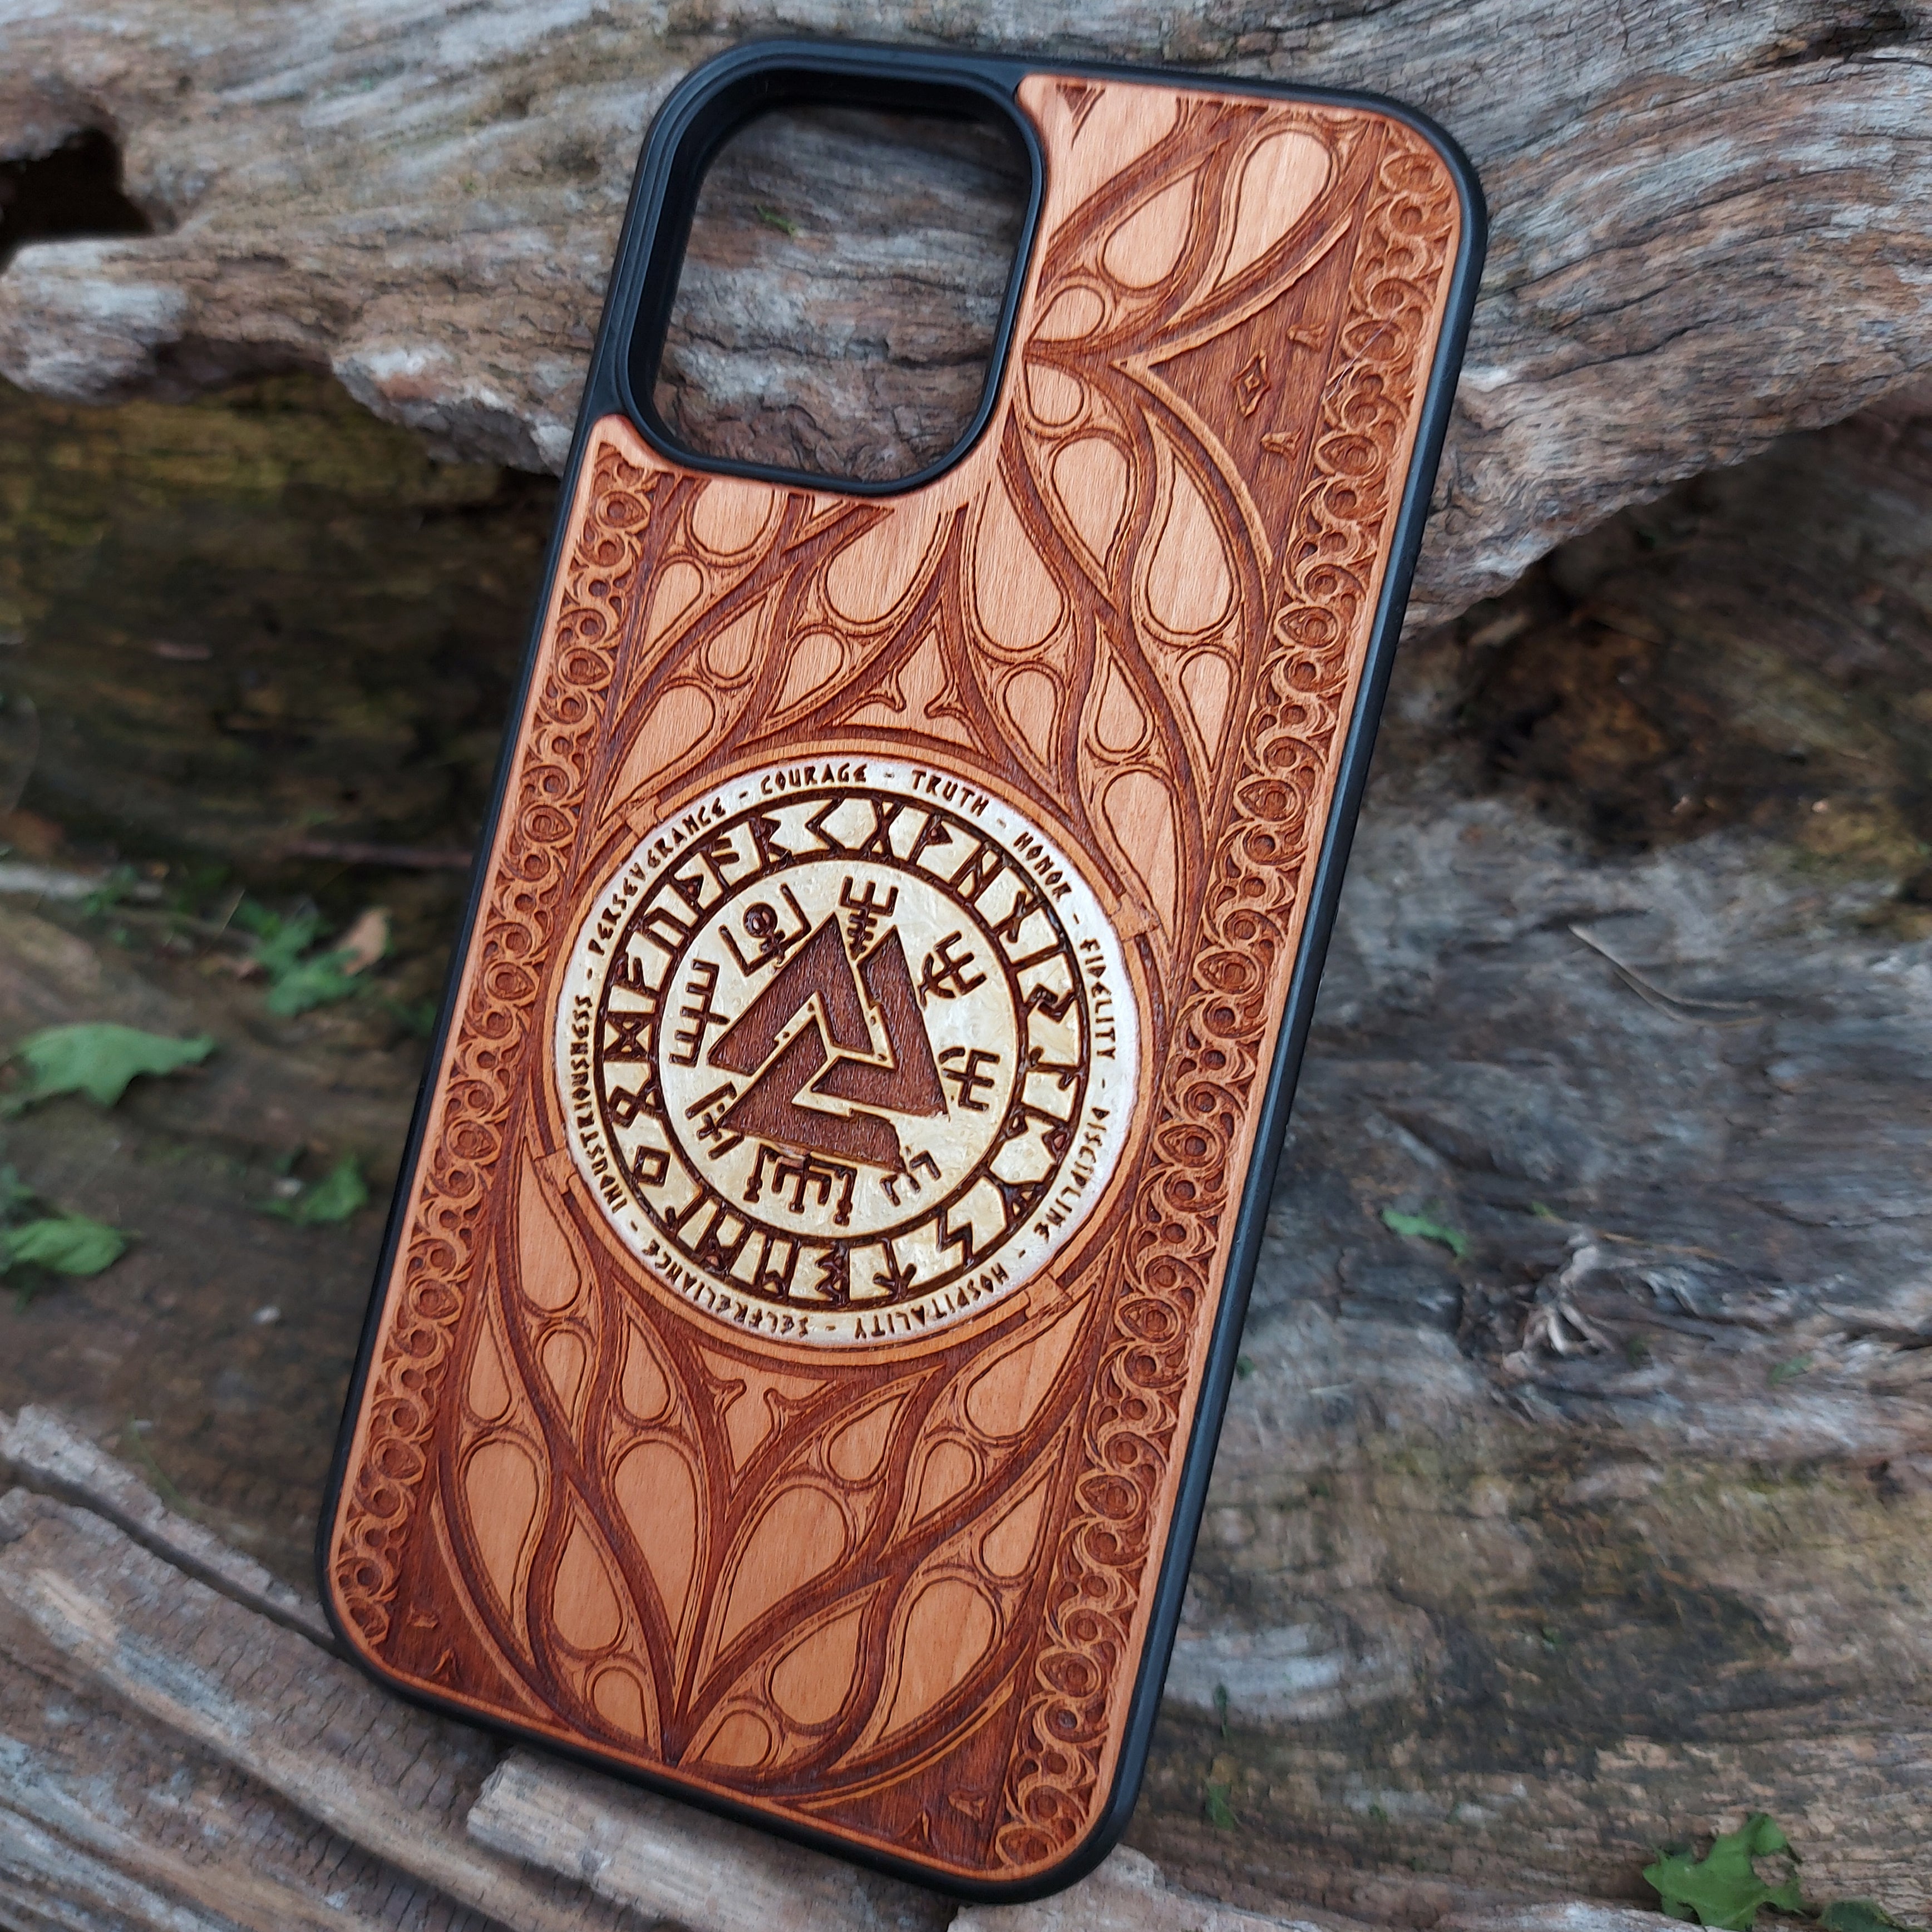 Leather and Wood iPhone Case, Keyway, Handcrafted iPhone 12 Pro Max Cases